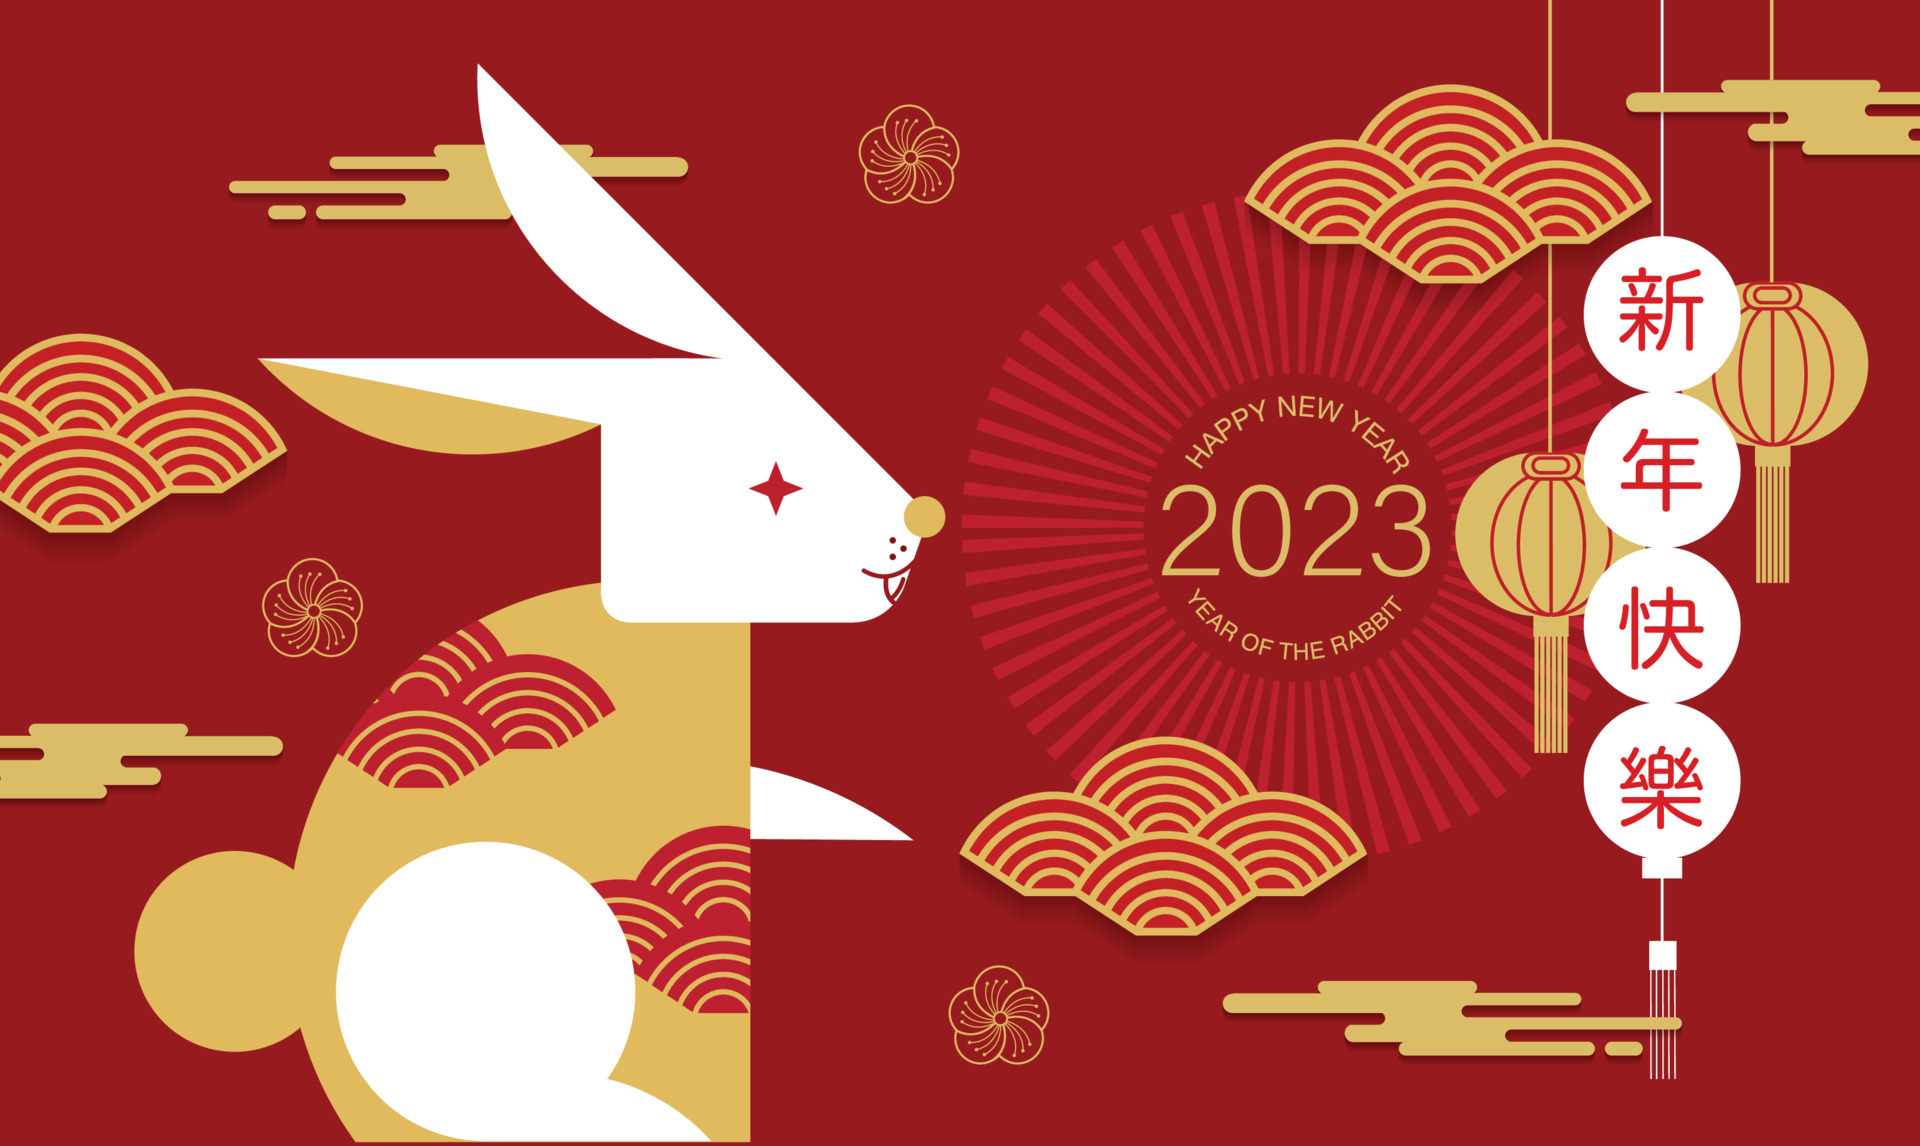 happy-new-year-2023-png-image-rabbit-year-red-creative-2023-happy-new